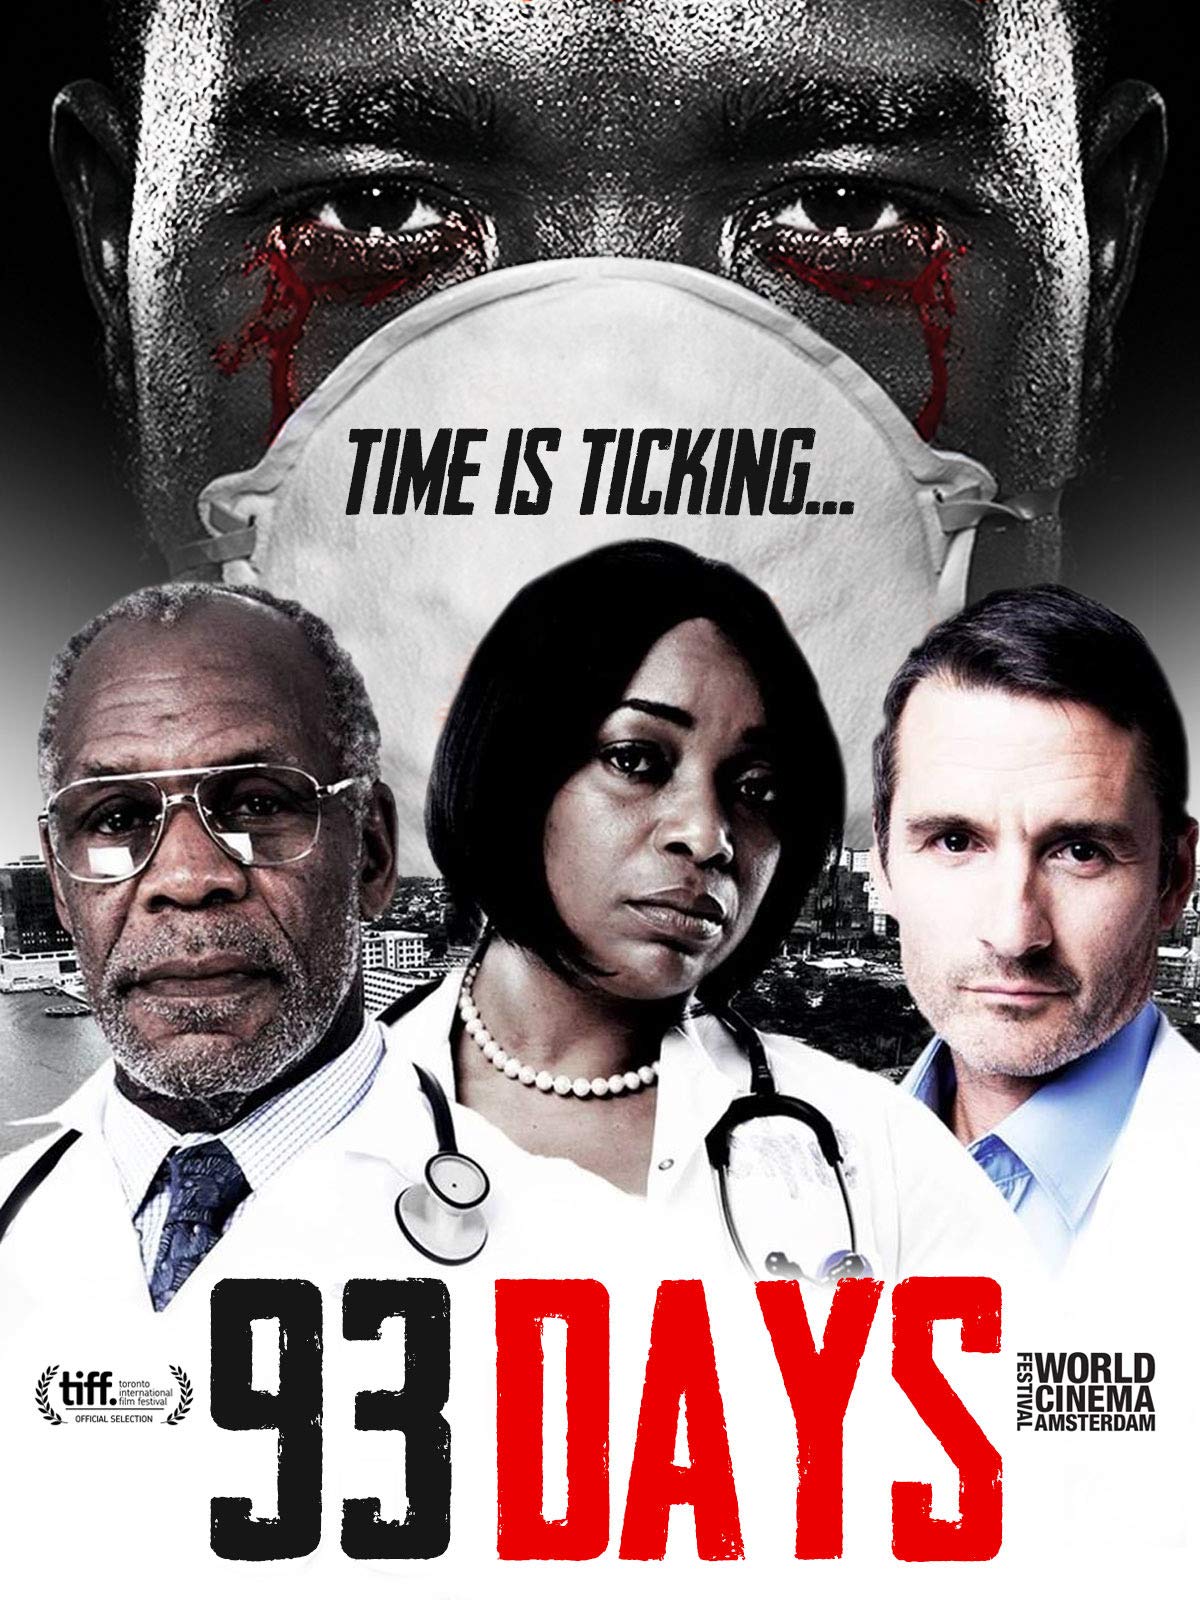 9-fascinating-nollywood-movie-you-need-to-see-93-days